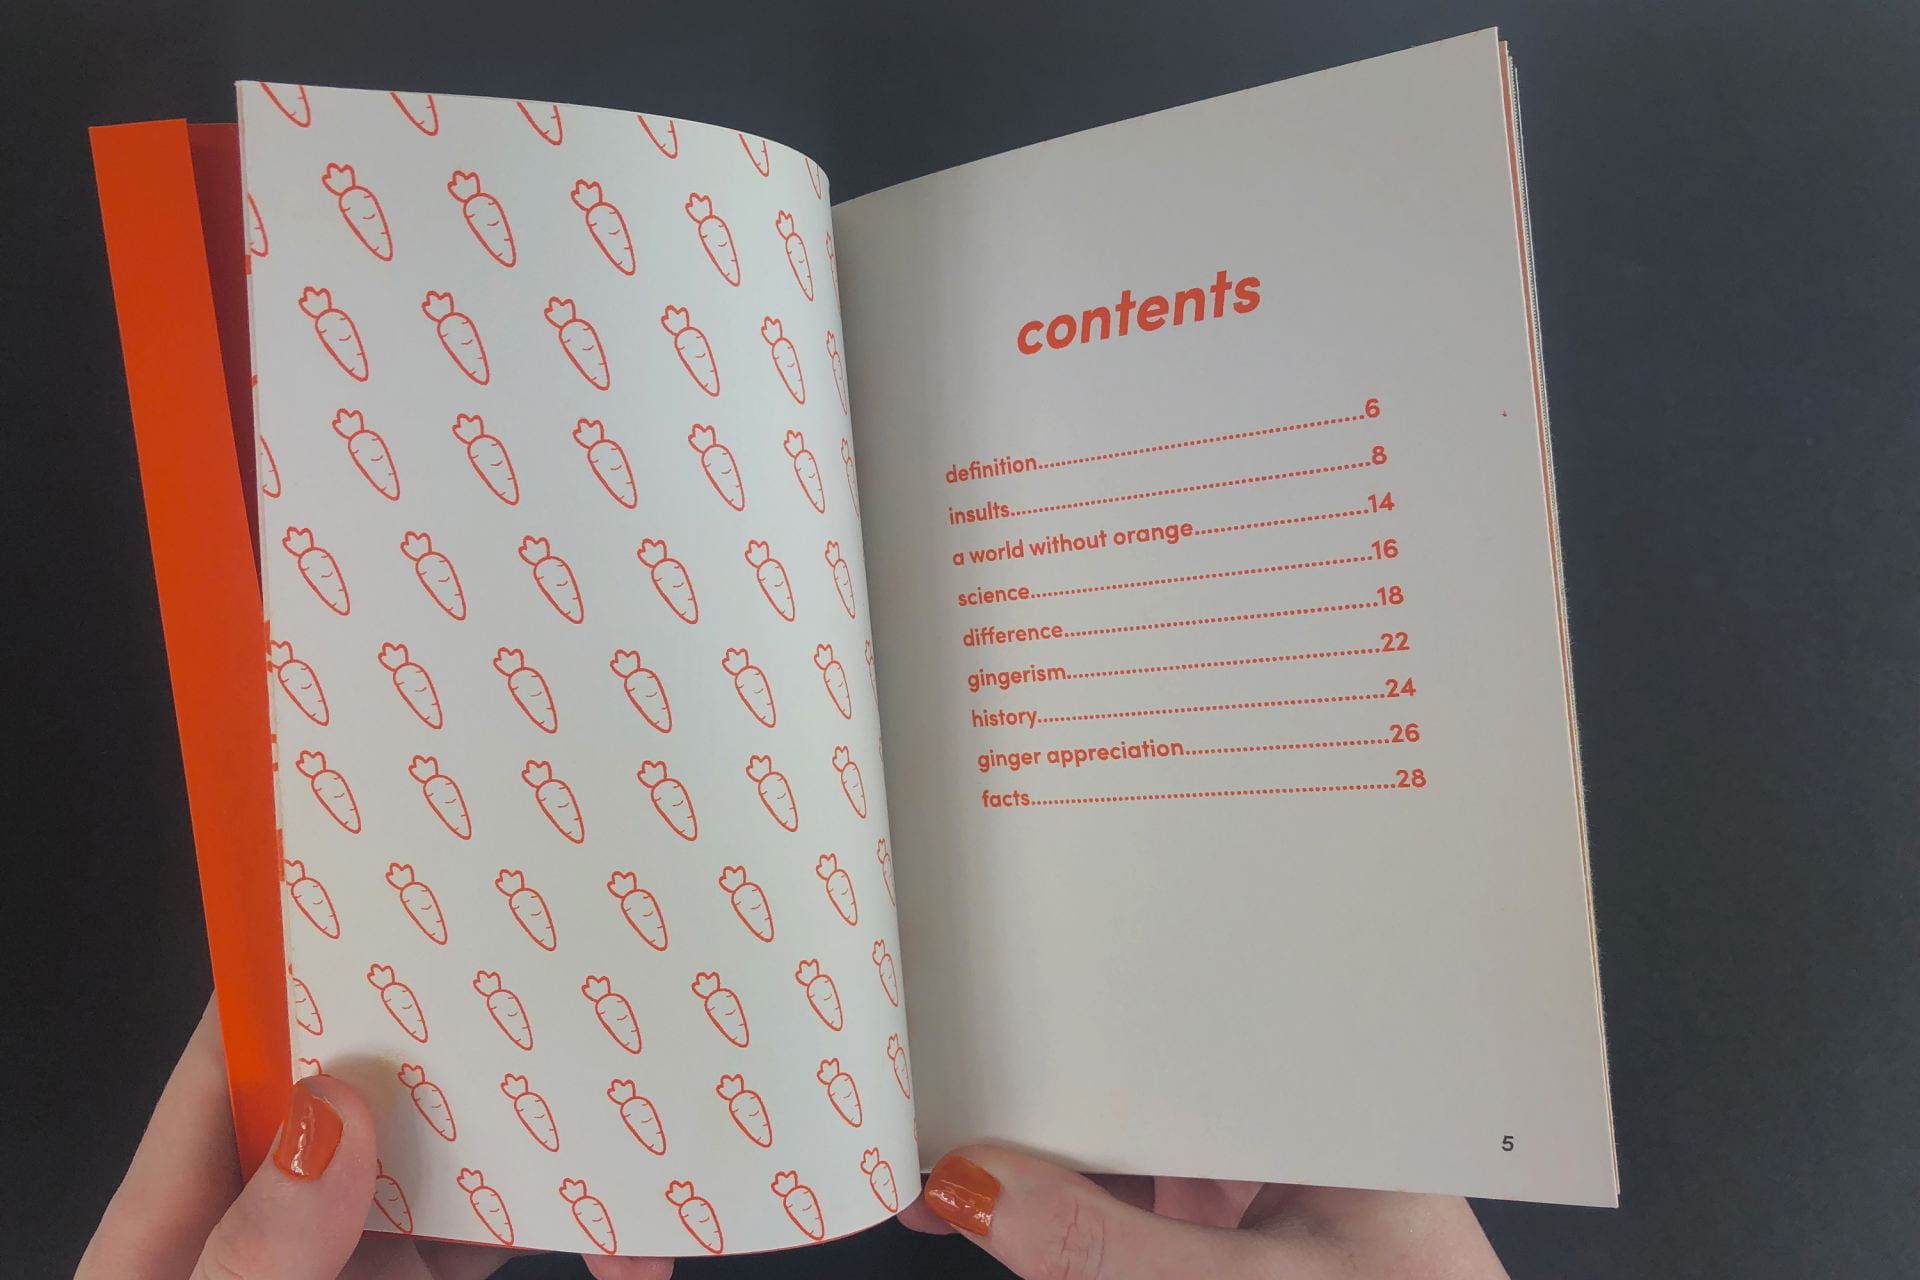 The contents page of a book with pictures of carrots.